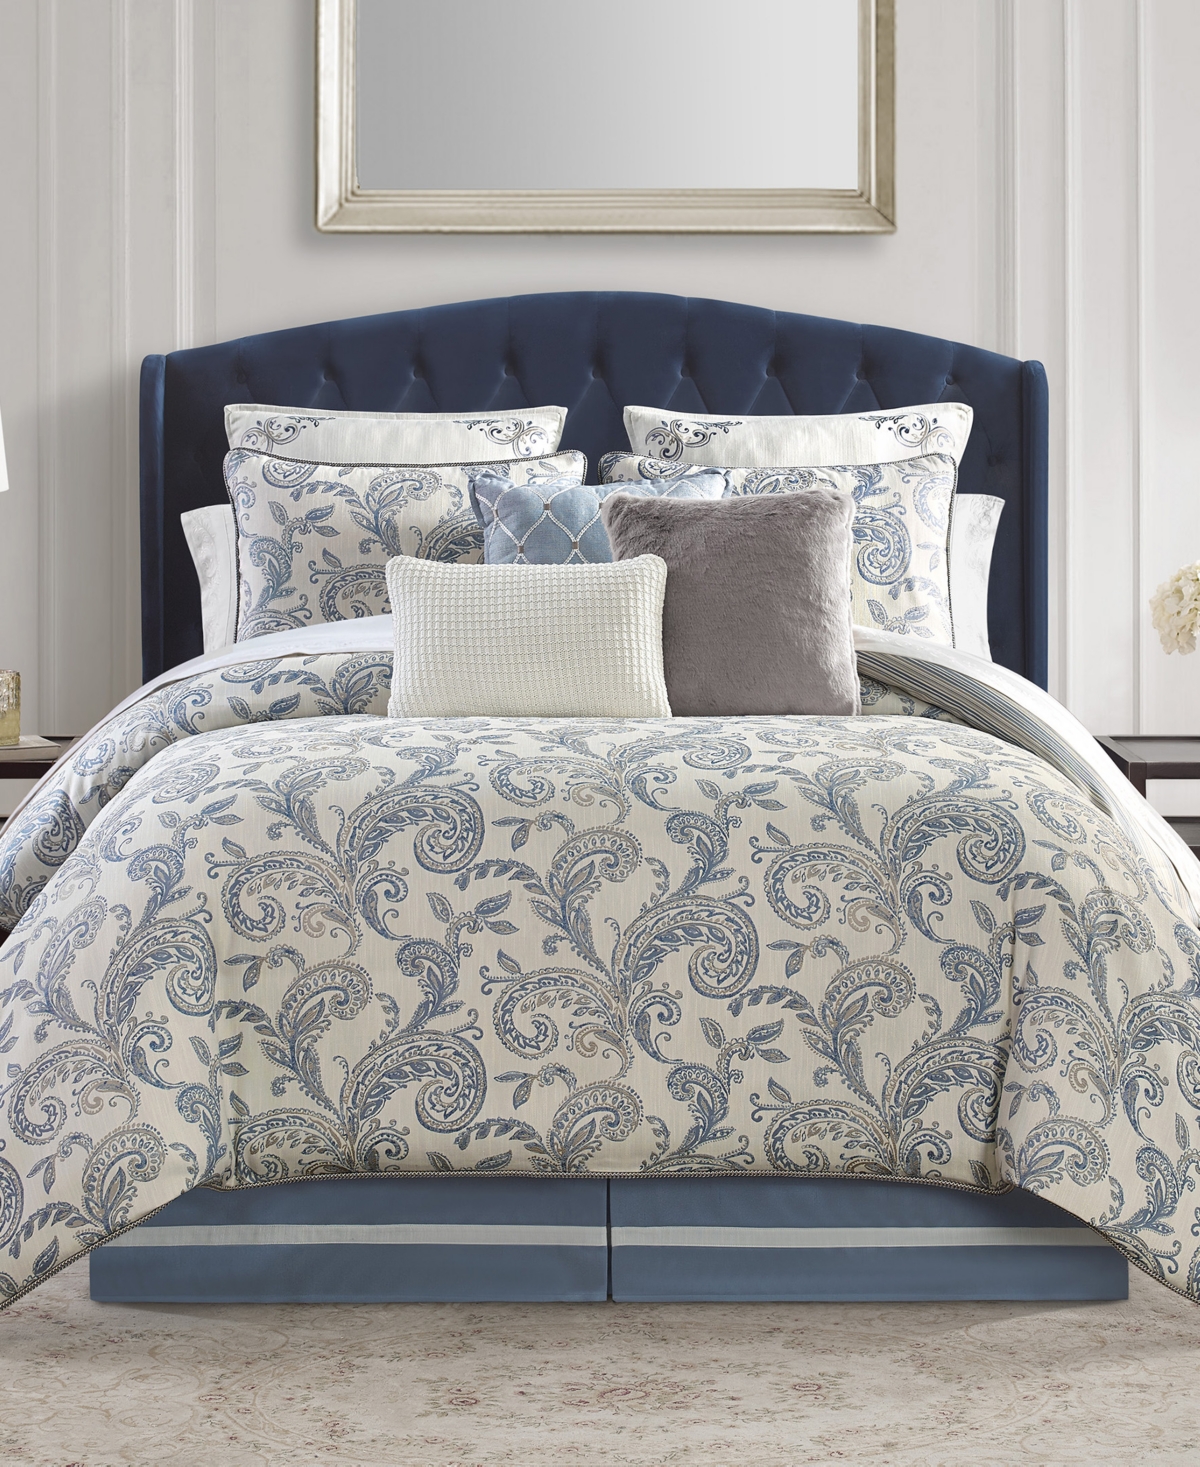 Waterford Florence 6 Piece Comforter Set, Queen In Chambray Blue